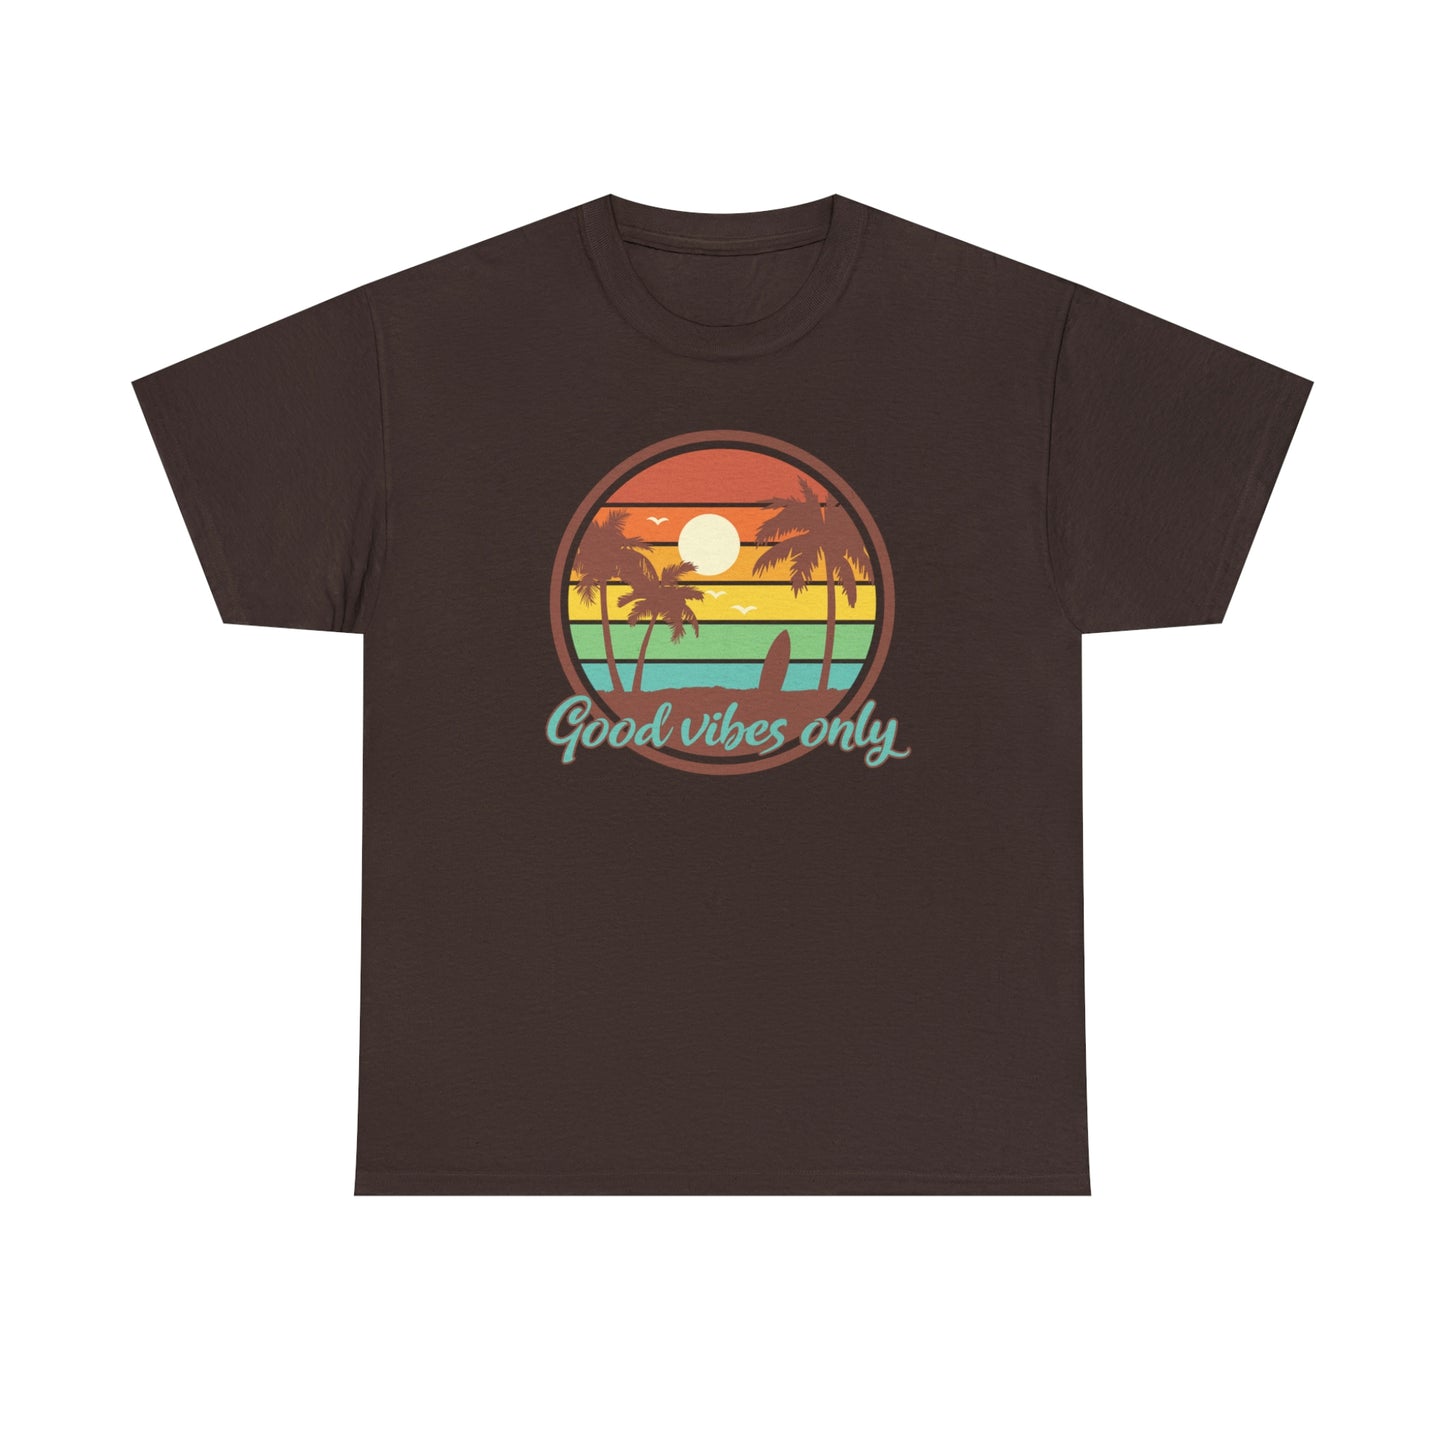 Good Vibes T- Shirt For Summer Vibes TShirt For Beach Scene T Shirt With Sunset T-Shirt Inspirational TShirt For Vacation Tee